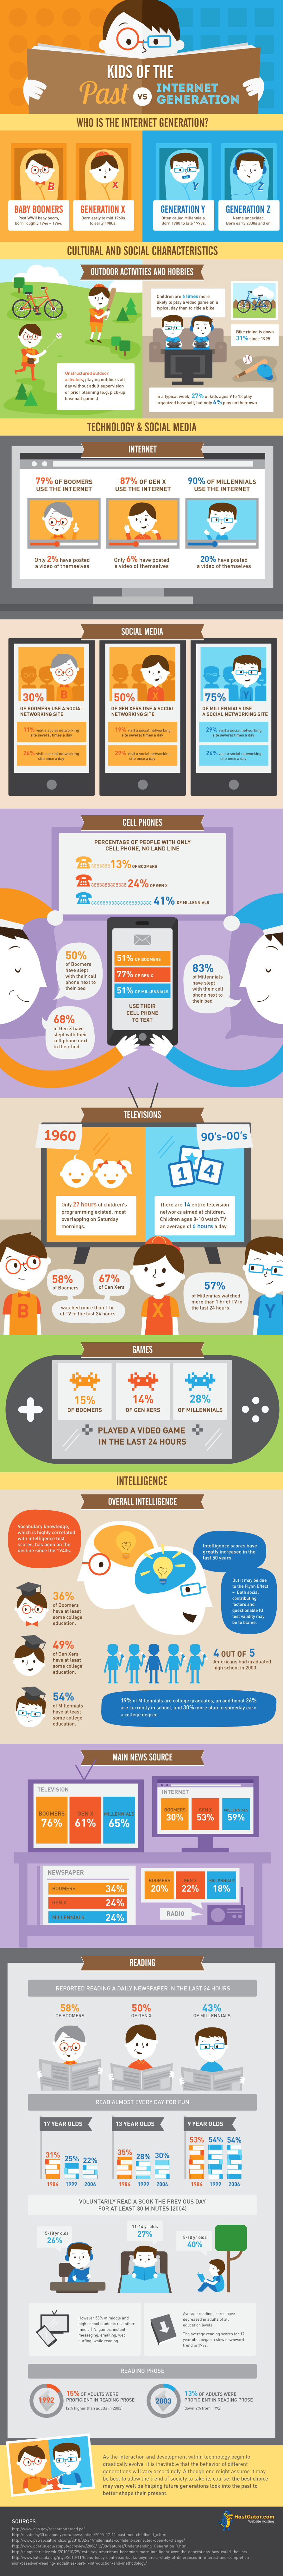 kids-of-the-past-vs-internet-generation-infographic